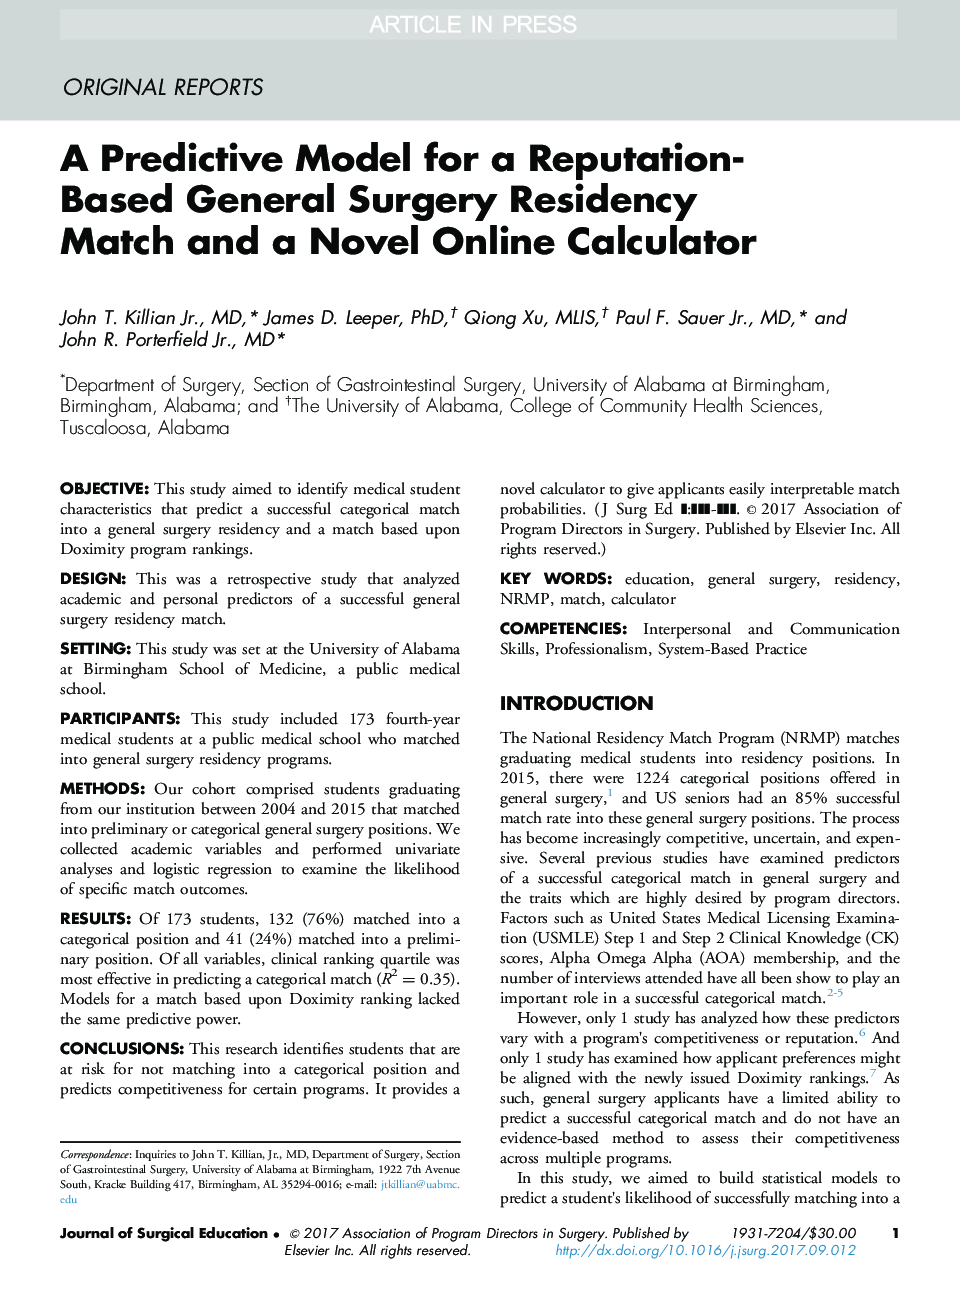 A Predictive Model for a Reputation-Based General Surgery Residency Match and a Novel Online Calculator